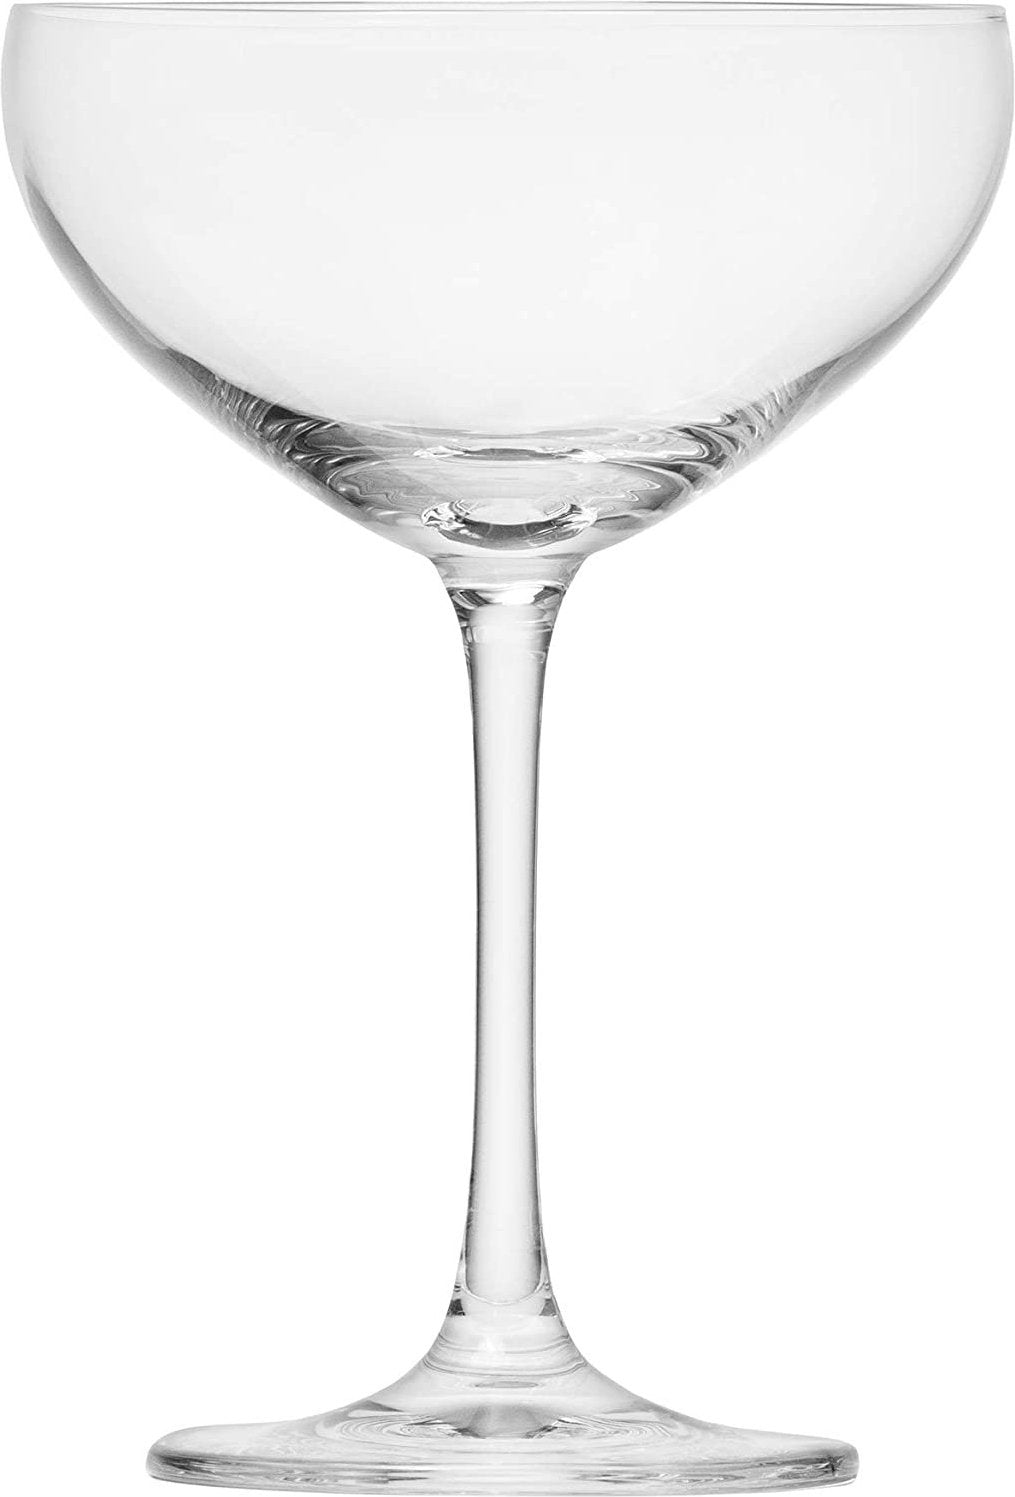 Schott Zwiesel - 9.5oz Bar Special Saucer Champagne Glasses Set of 6 - 0023.111219